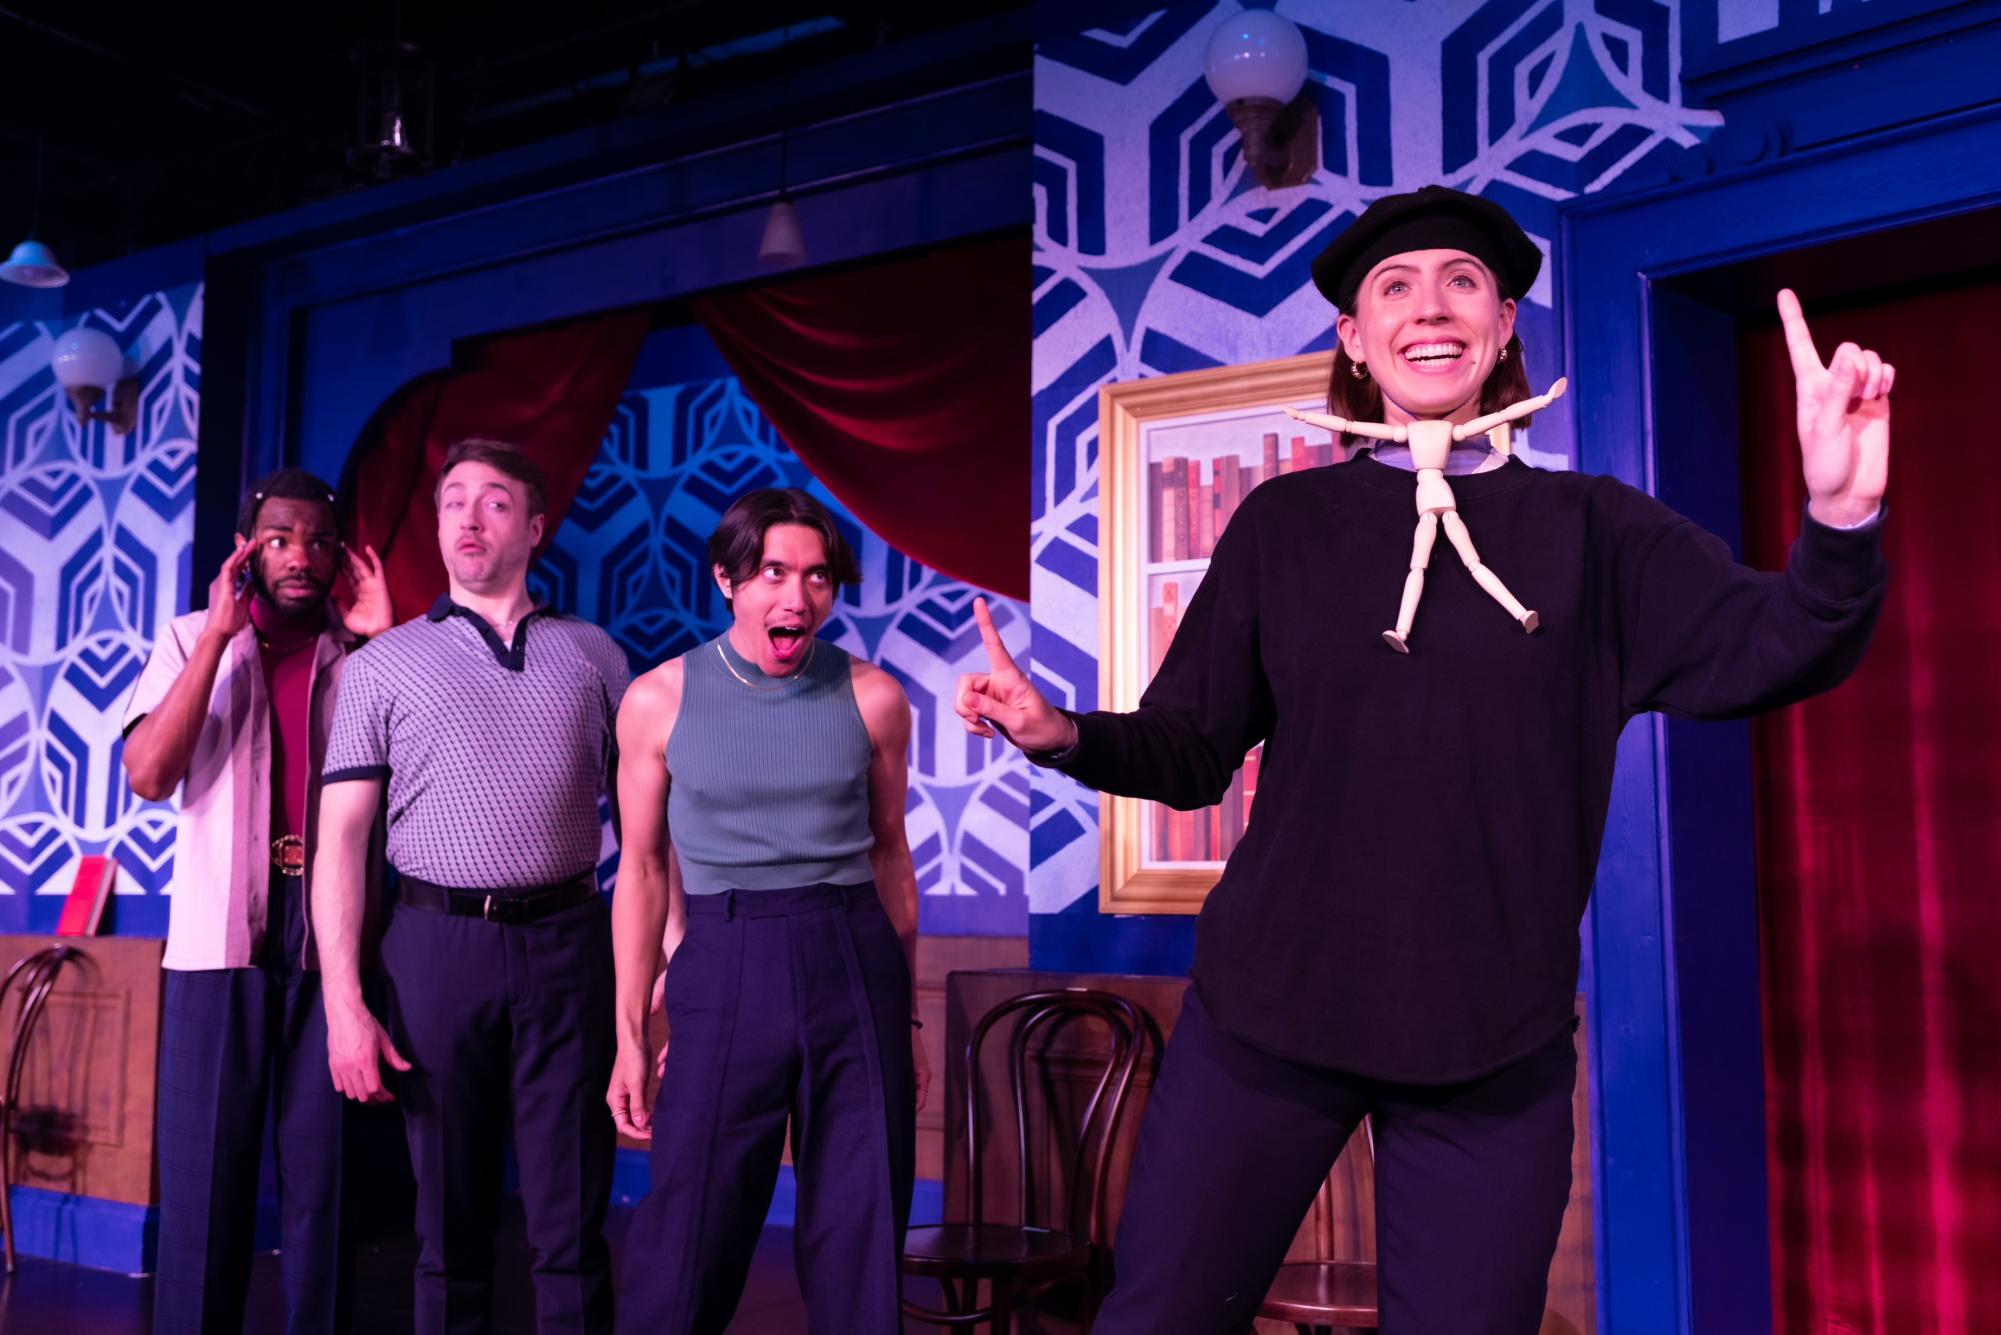 Long before she was cracking up crowds on improv’s premier stage at Second City, Claire McFadden spent her days in Evanston getting her first taste of improv and sketch comedy. (Photo courtesy of Claire McFadden)